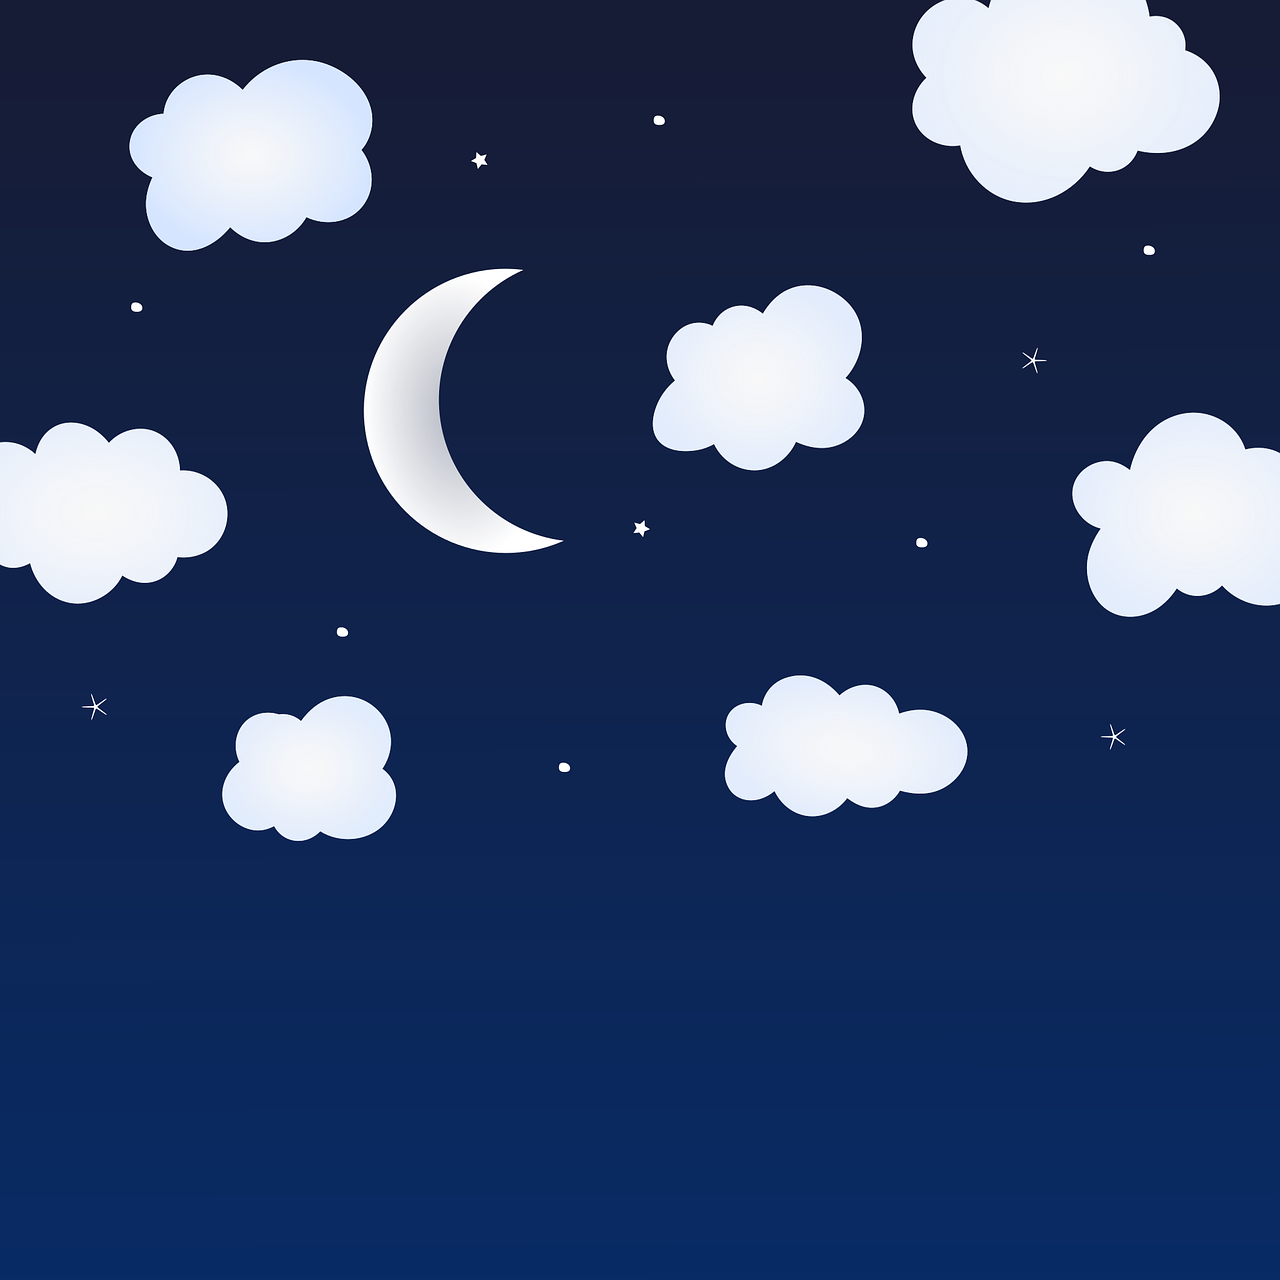 Moon,clouds,background,night,free pictures - free image from needpix.com